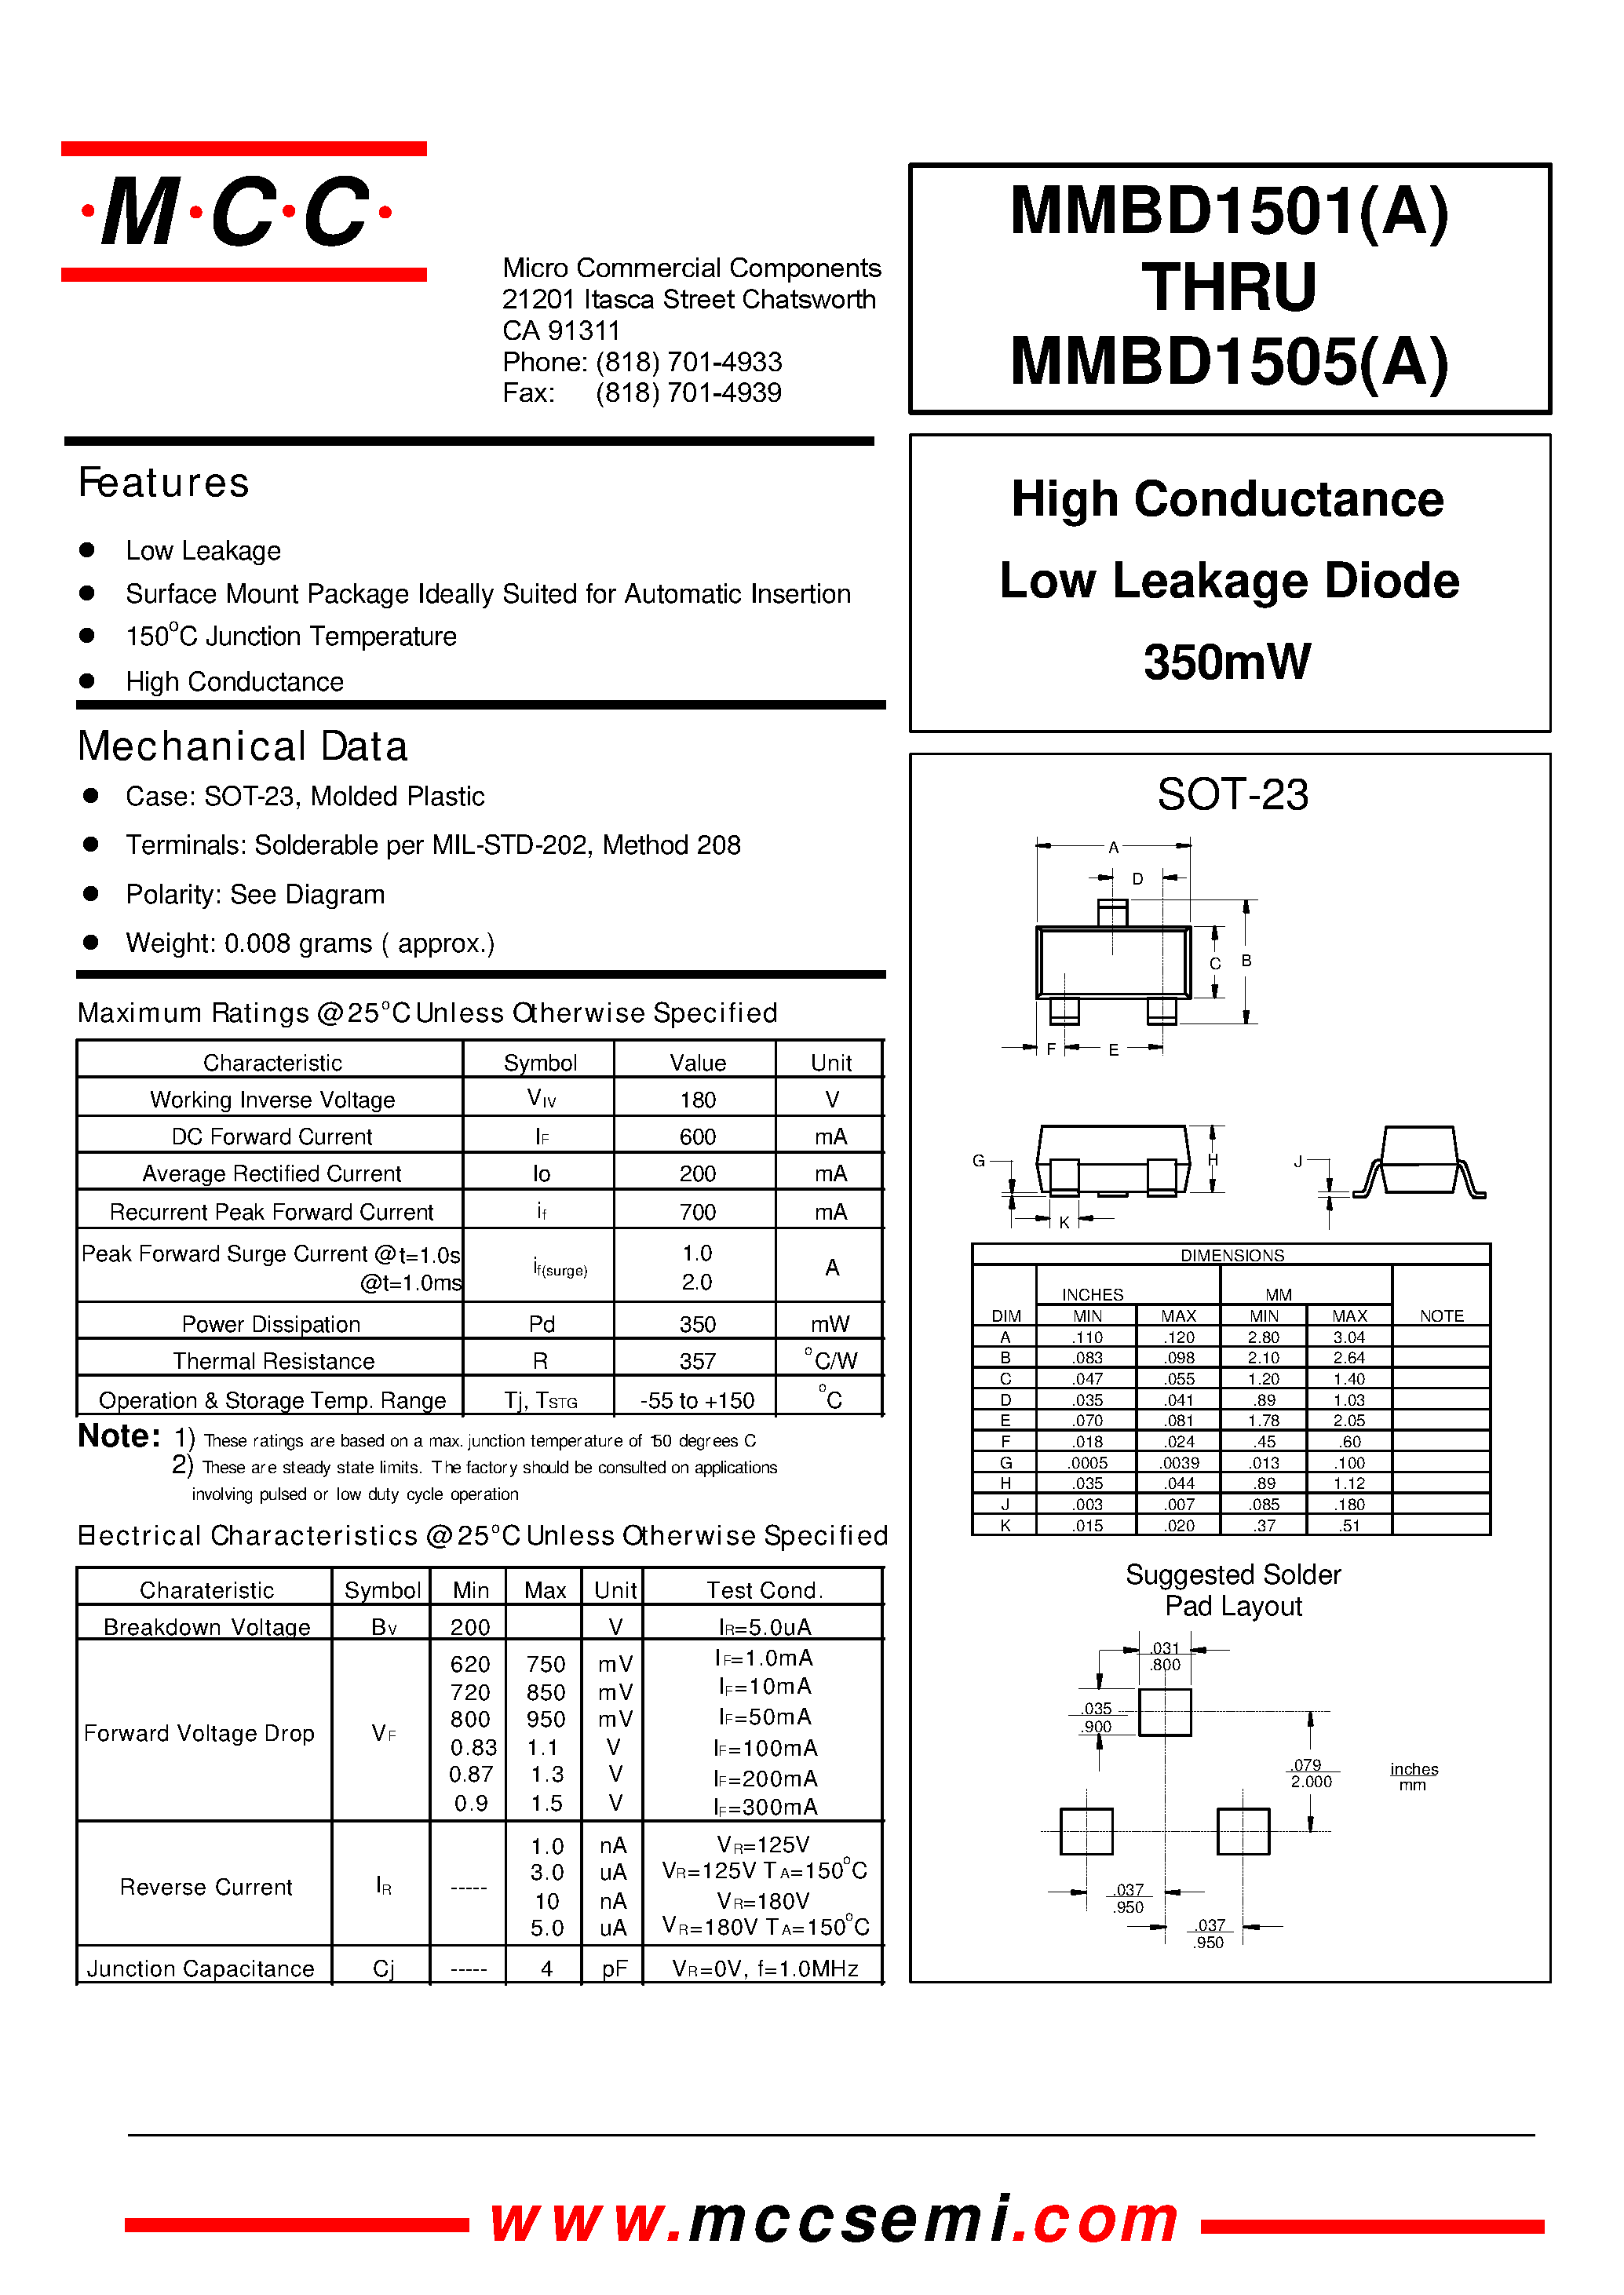 Даташит MMBD1504 - High Conductance Low Leakage Diode 350mW страница 1